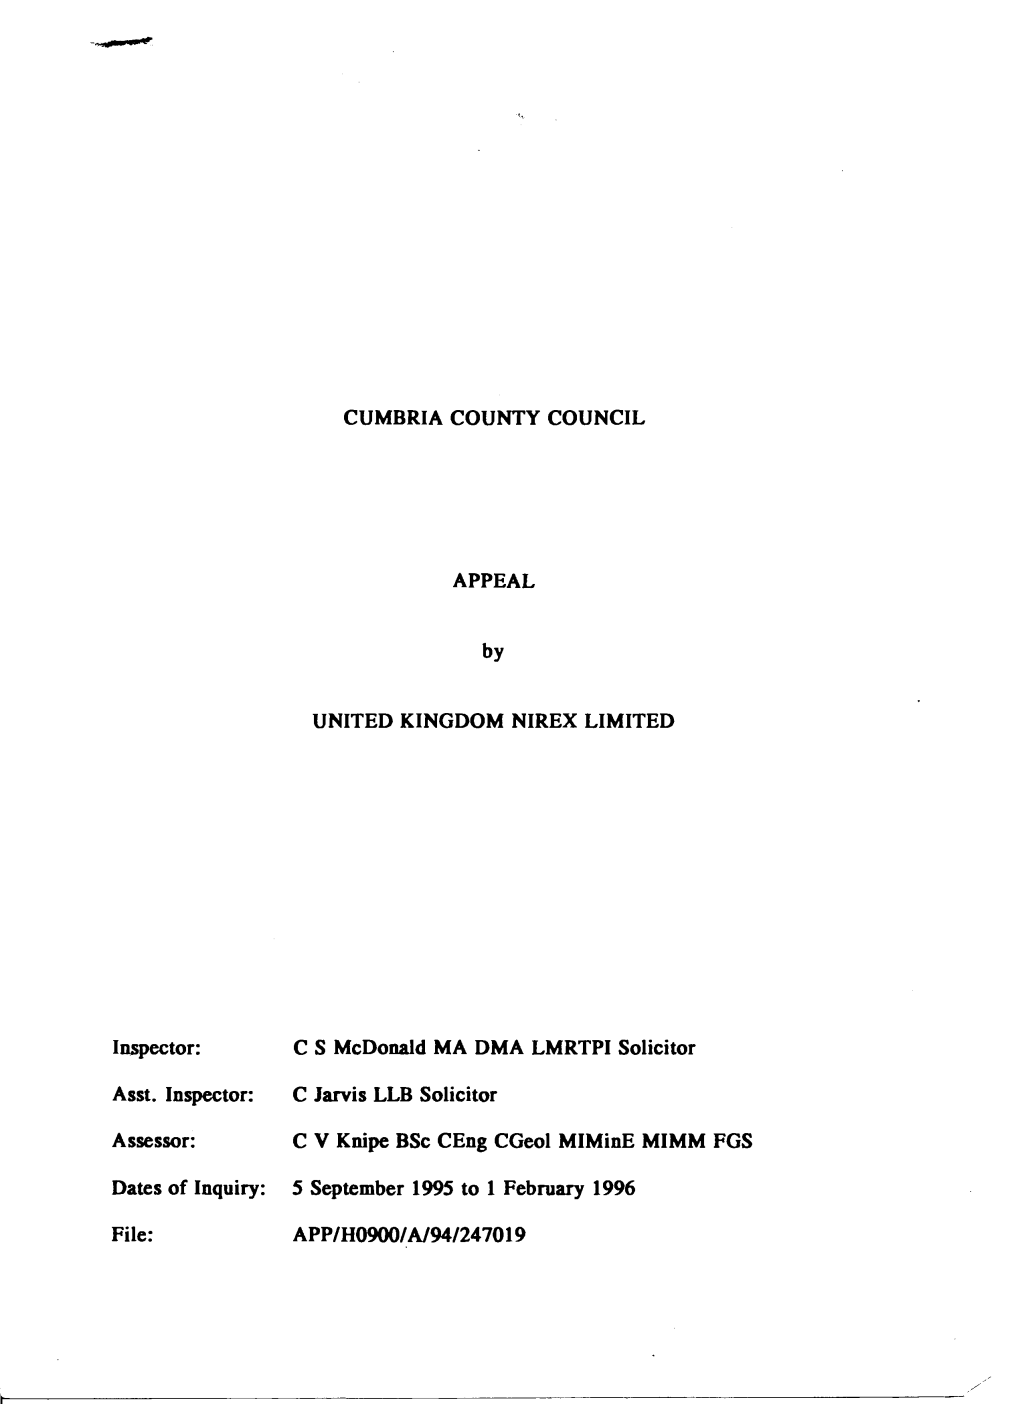 CUMBRIA COUNTY COUNCIL APPEAL by UNITED KINGDOM